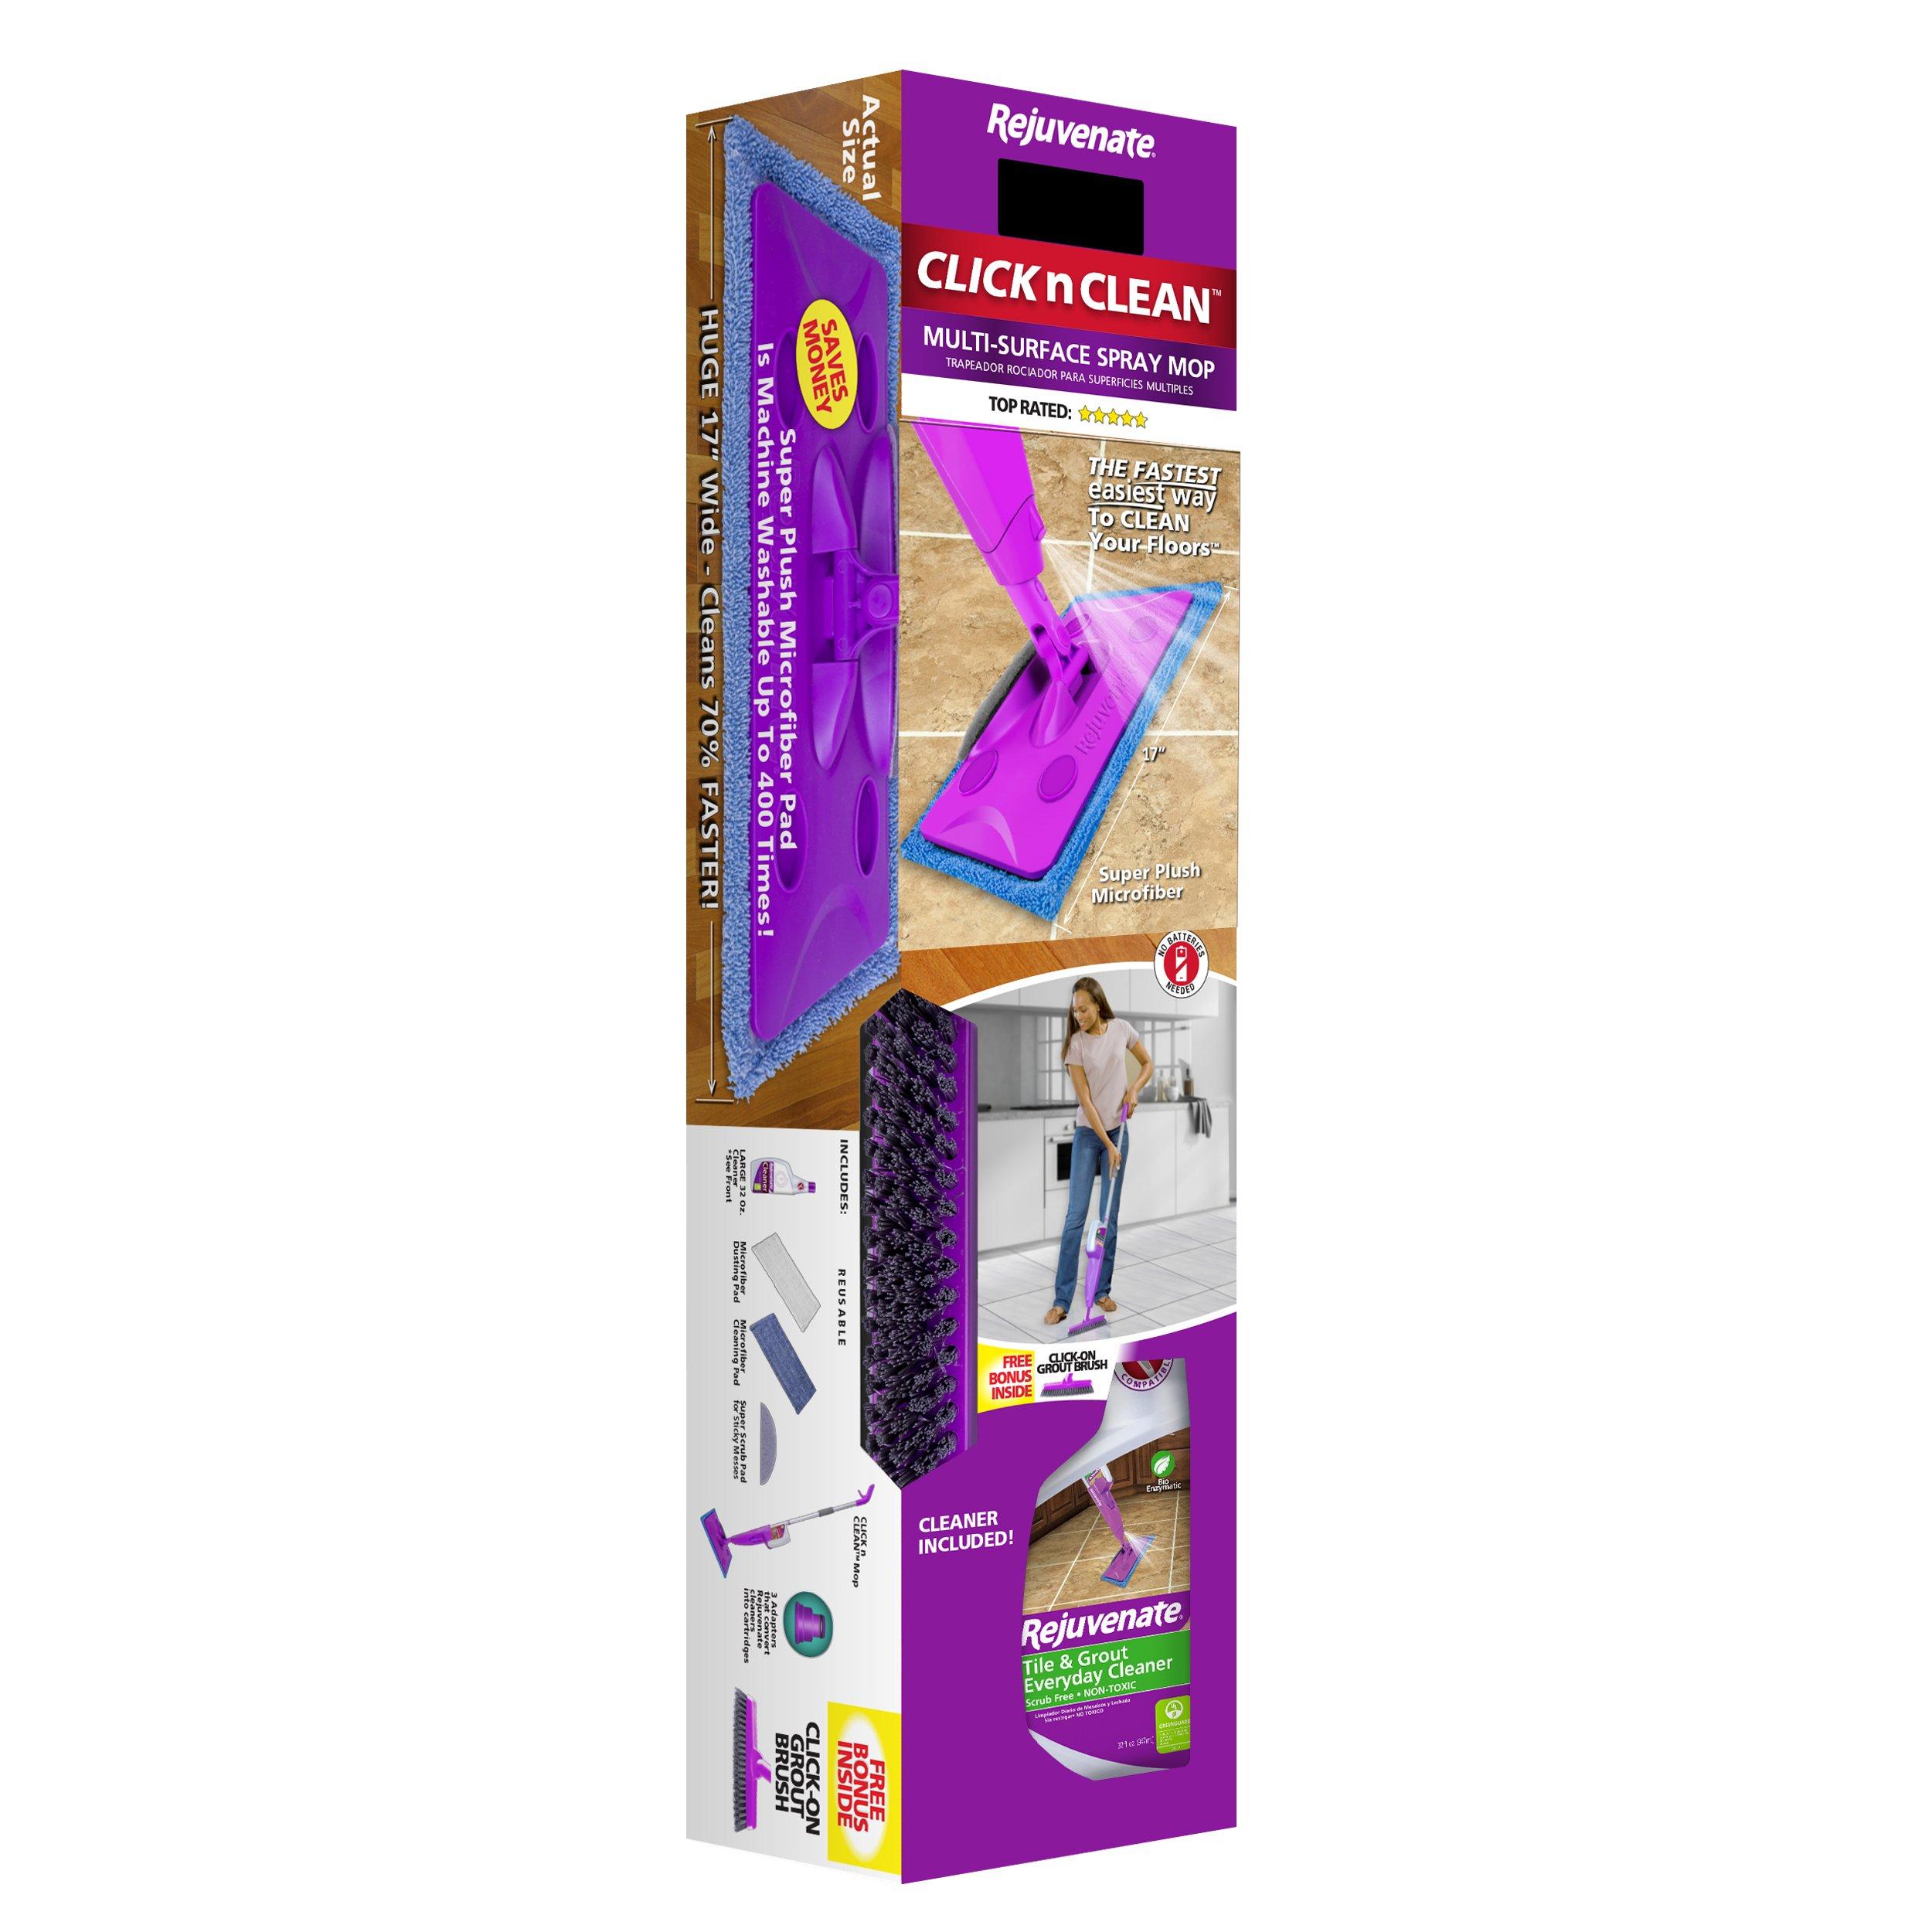 Rejuvenate Click n Clean Multi-Surface Spray Mop with Tile and Grout Cleaner